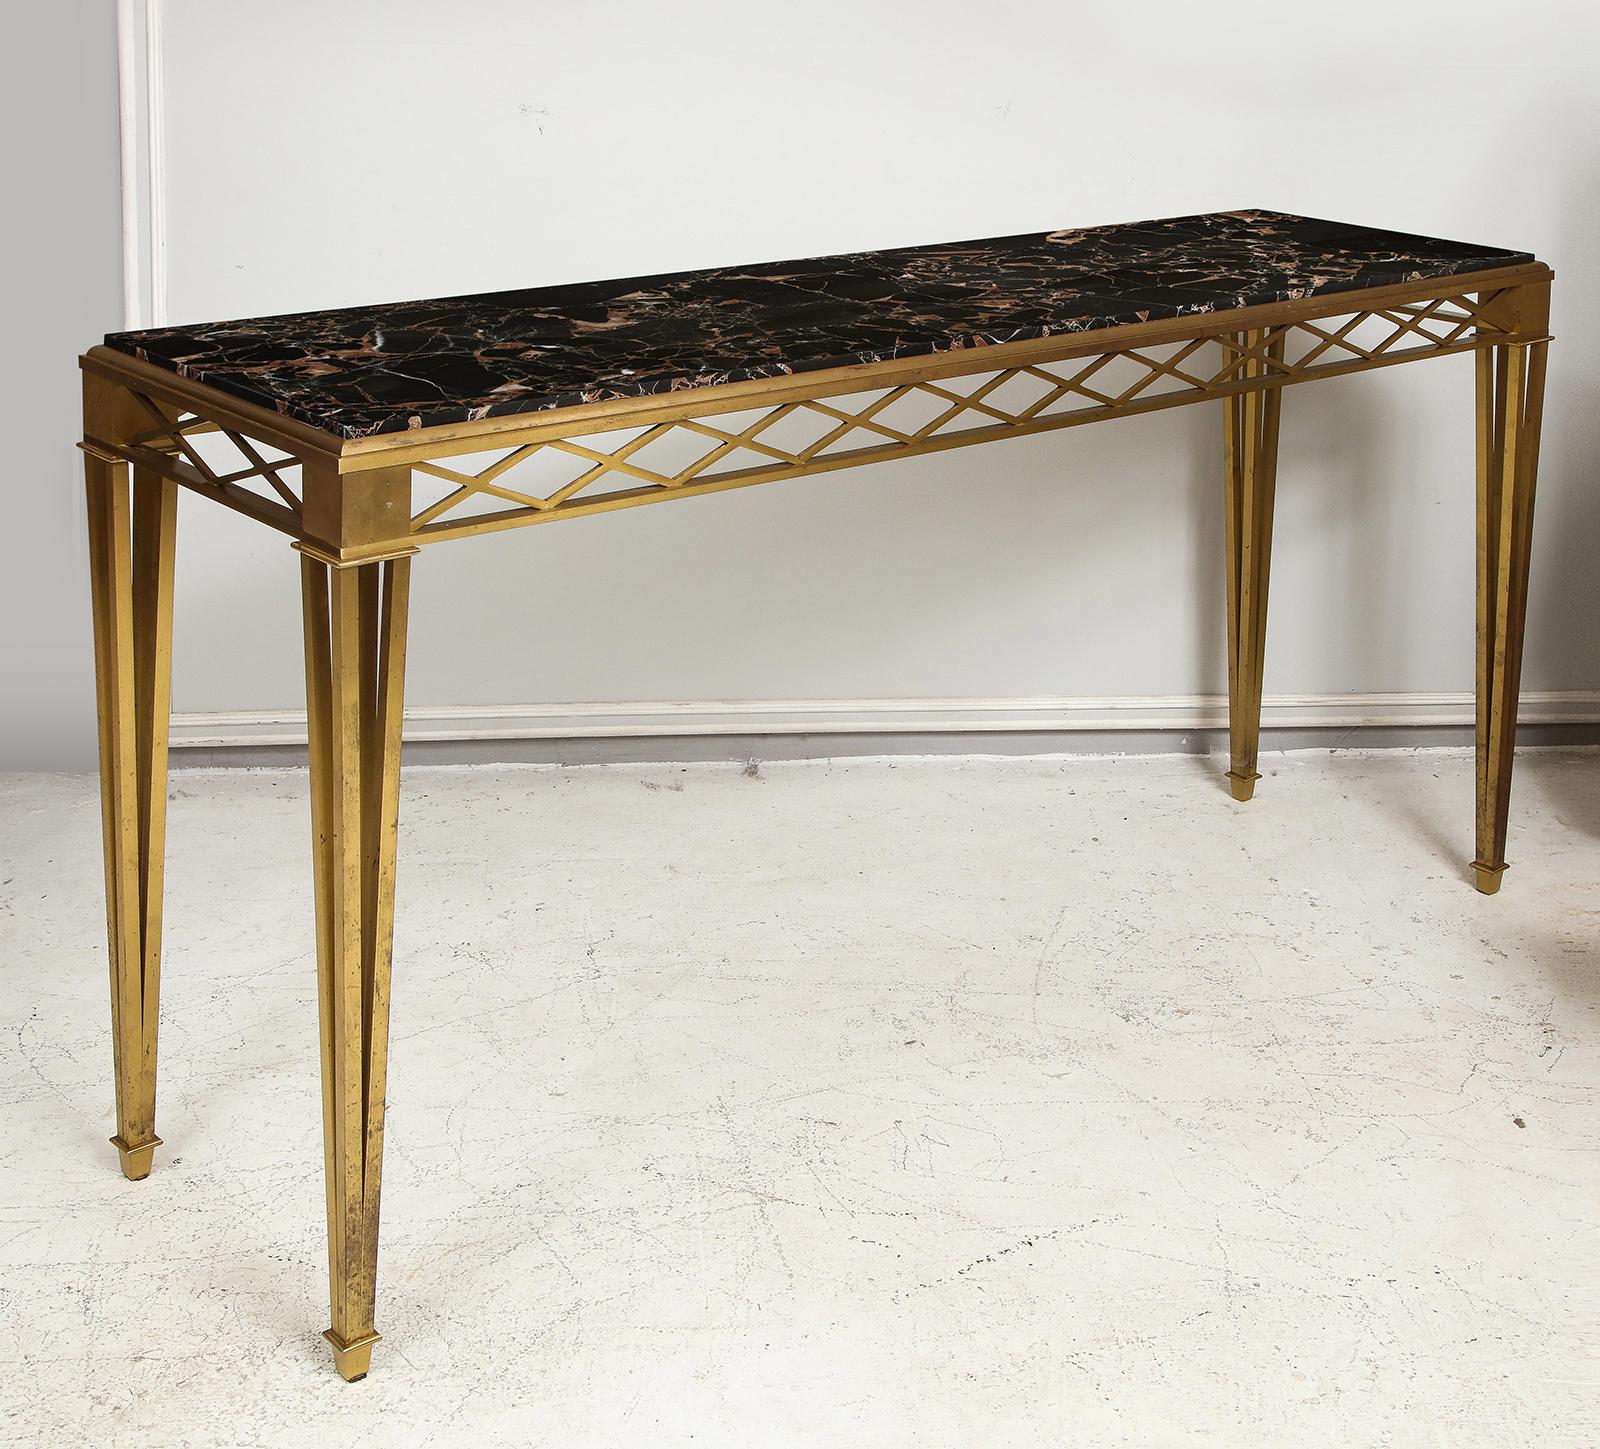 Bronze Marble-top Console in the Art Deco Manner on tapered legs.